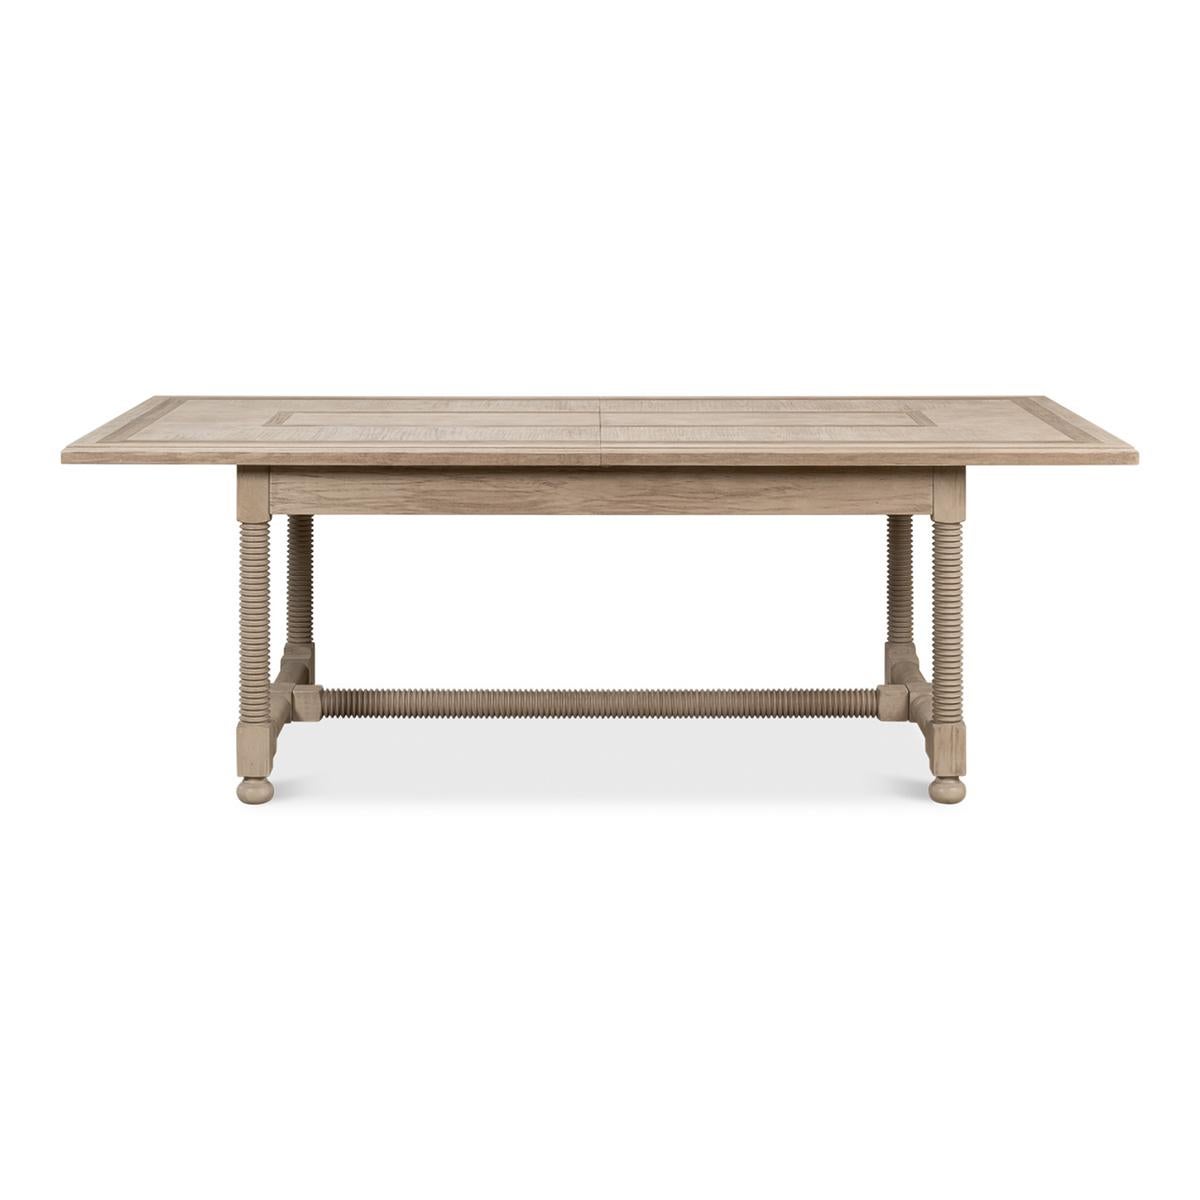 Country draw leaf extension dining table. Extending to 120 inches, the Table is a beautifully subtle masterpiece combining form and function. Constructed of pine and in our Barn Grey finish, the unusual turned legs and inlay wood pattern on the